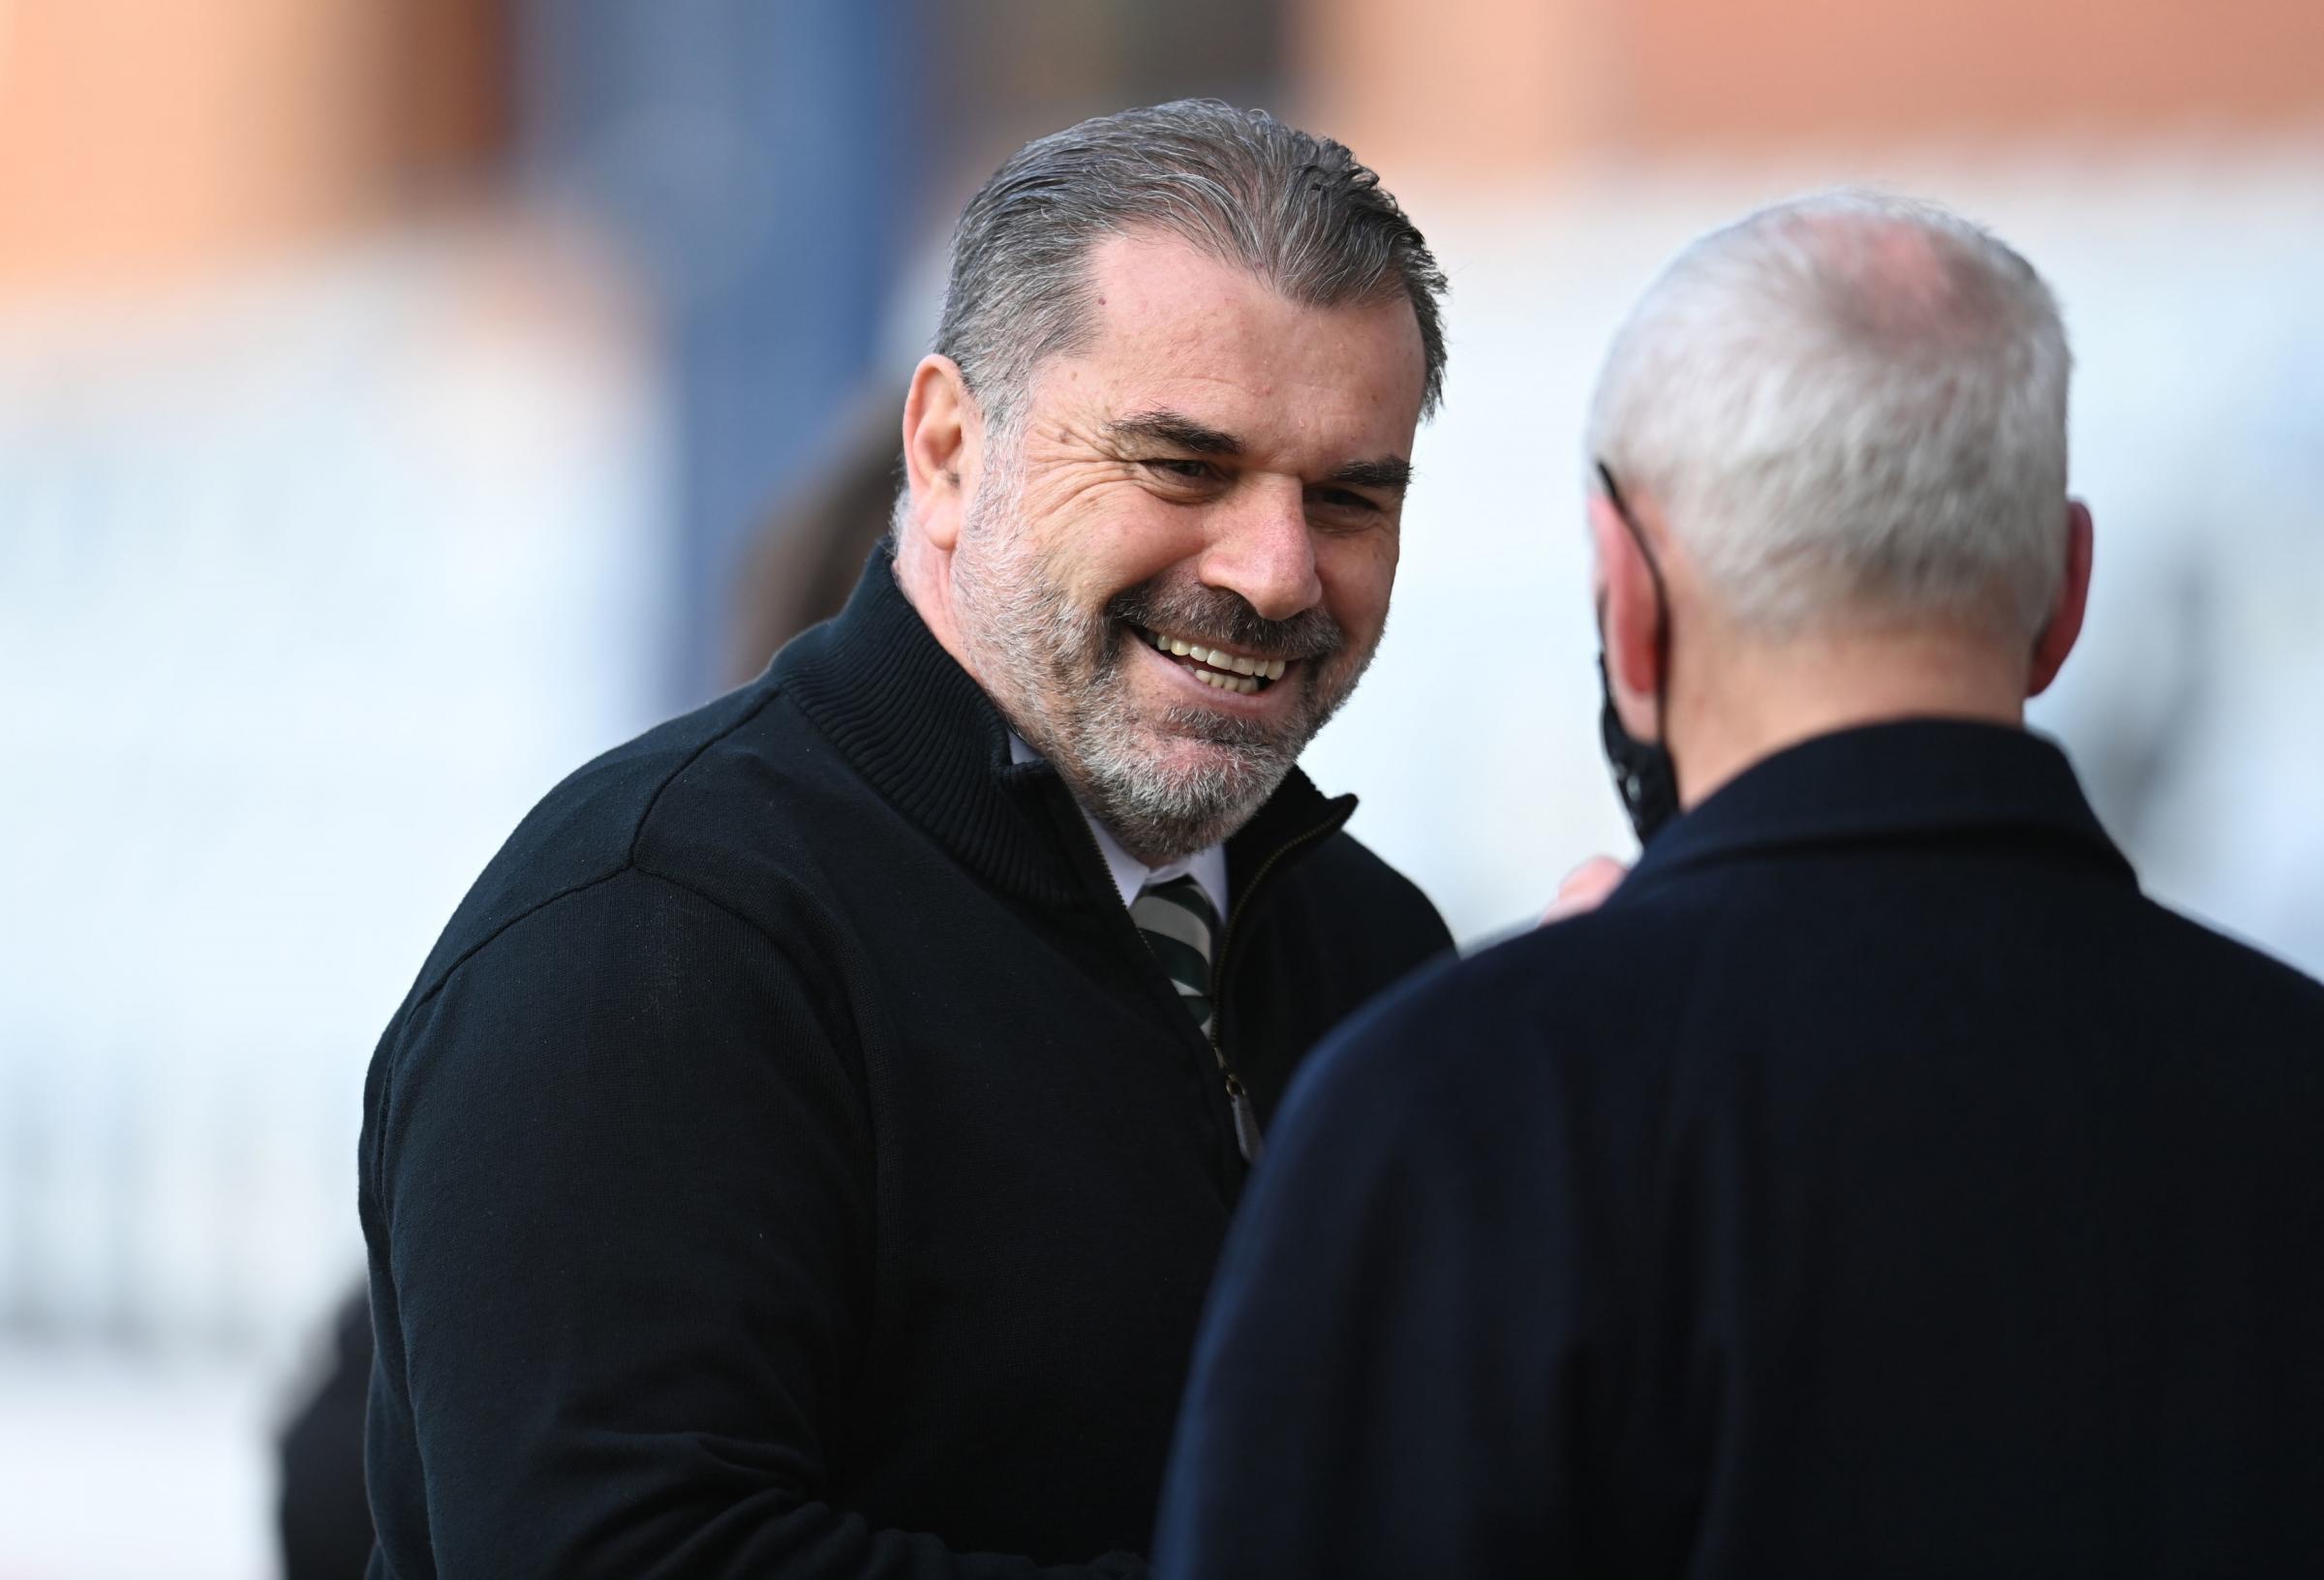 Celtic manager Ange Postecoglou addresses silence disturbance as he calls for 'respect and dignity'